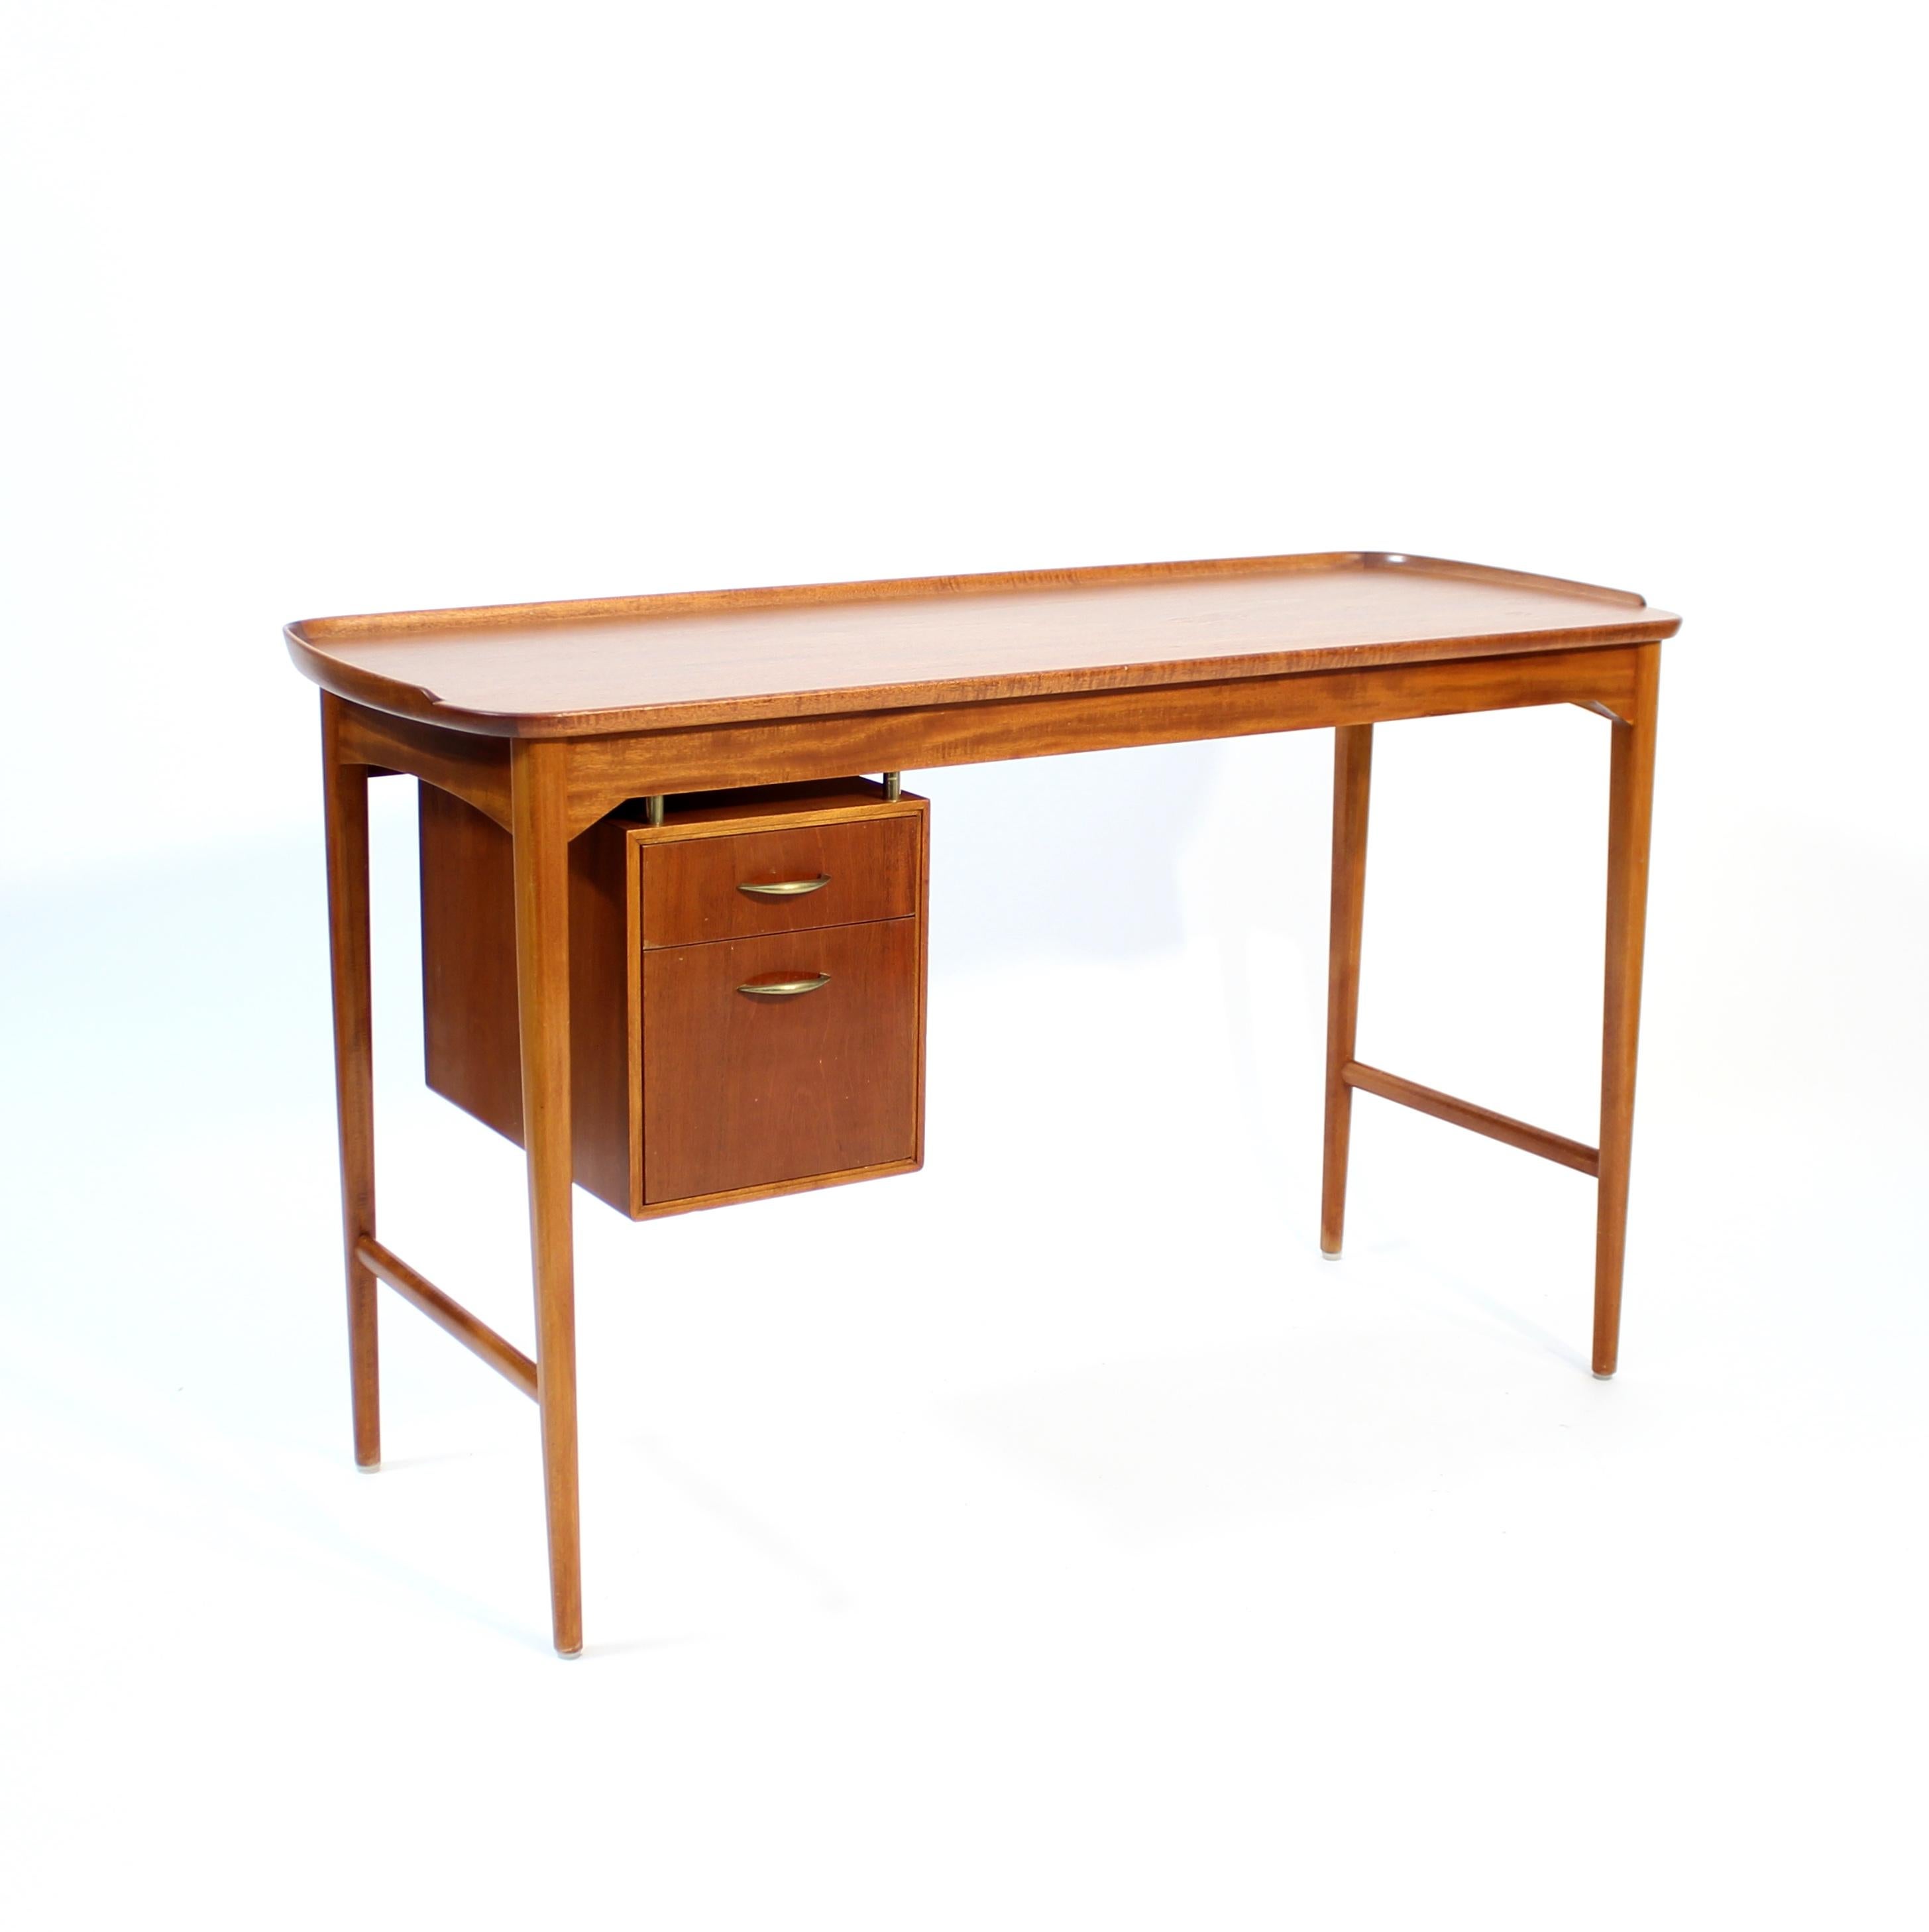 Smaller freestanding Swedish Mahogany desk with two drawers and a rim around the desk top. The two drawers has brass handles and the lower drawer have four storage departments in it. The desk is very light in appearance due to the thin and elegant